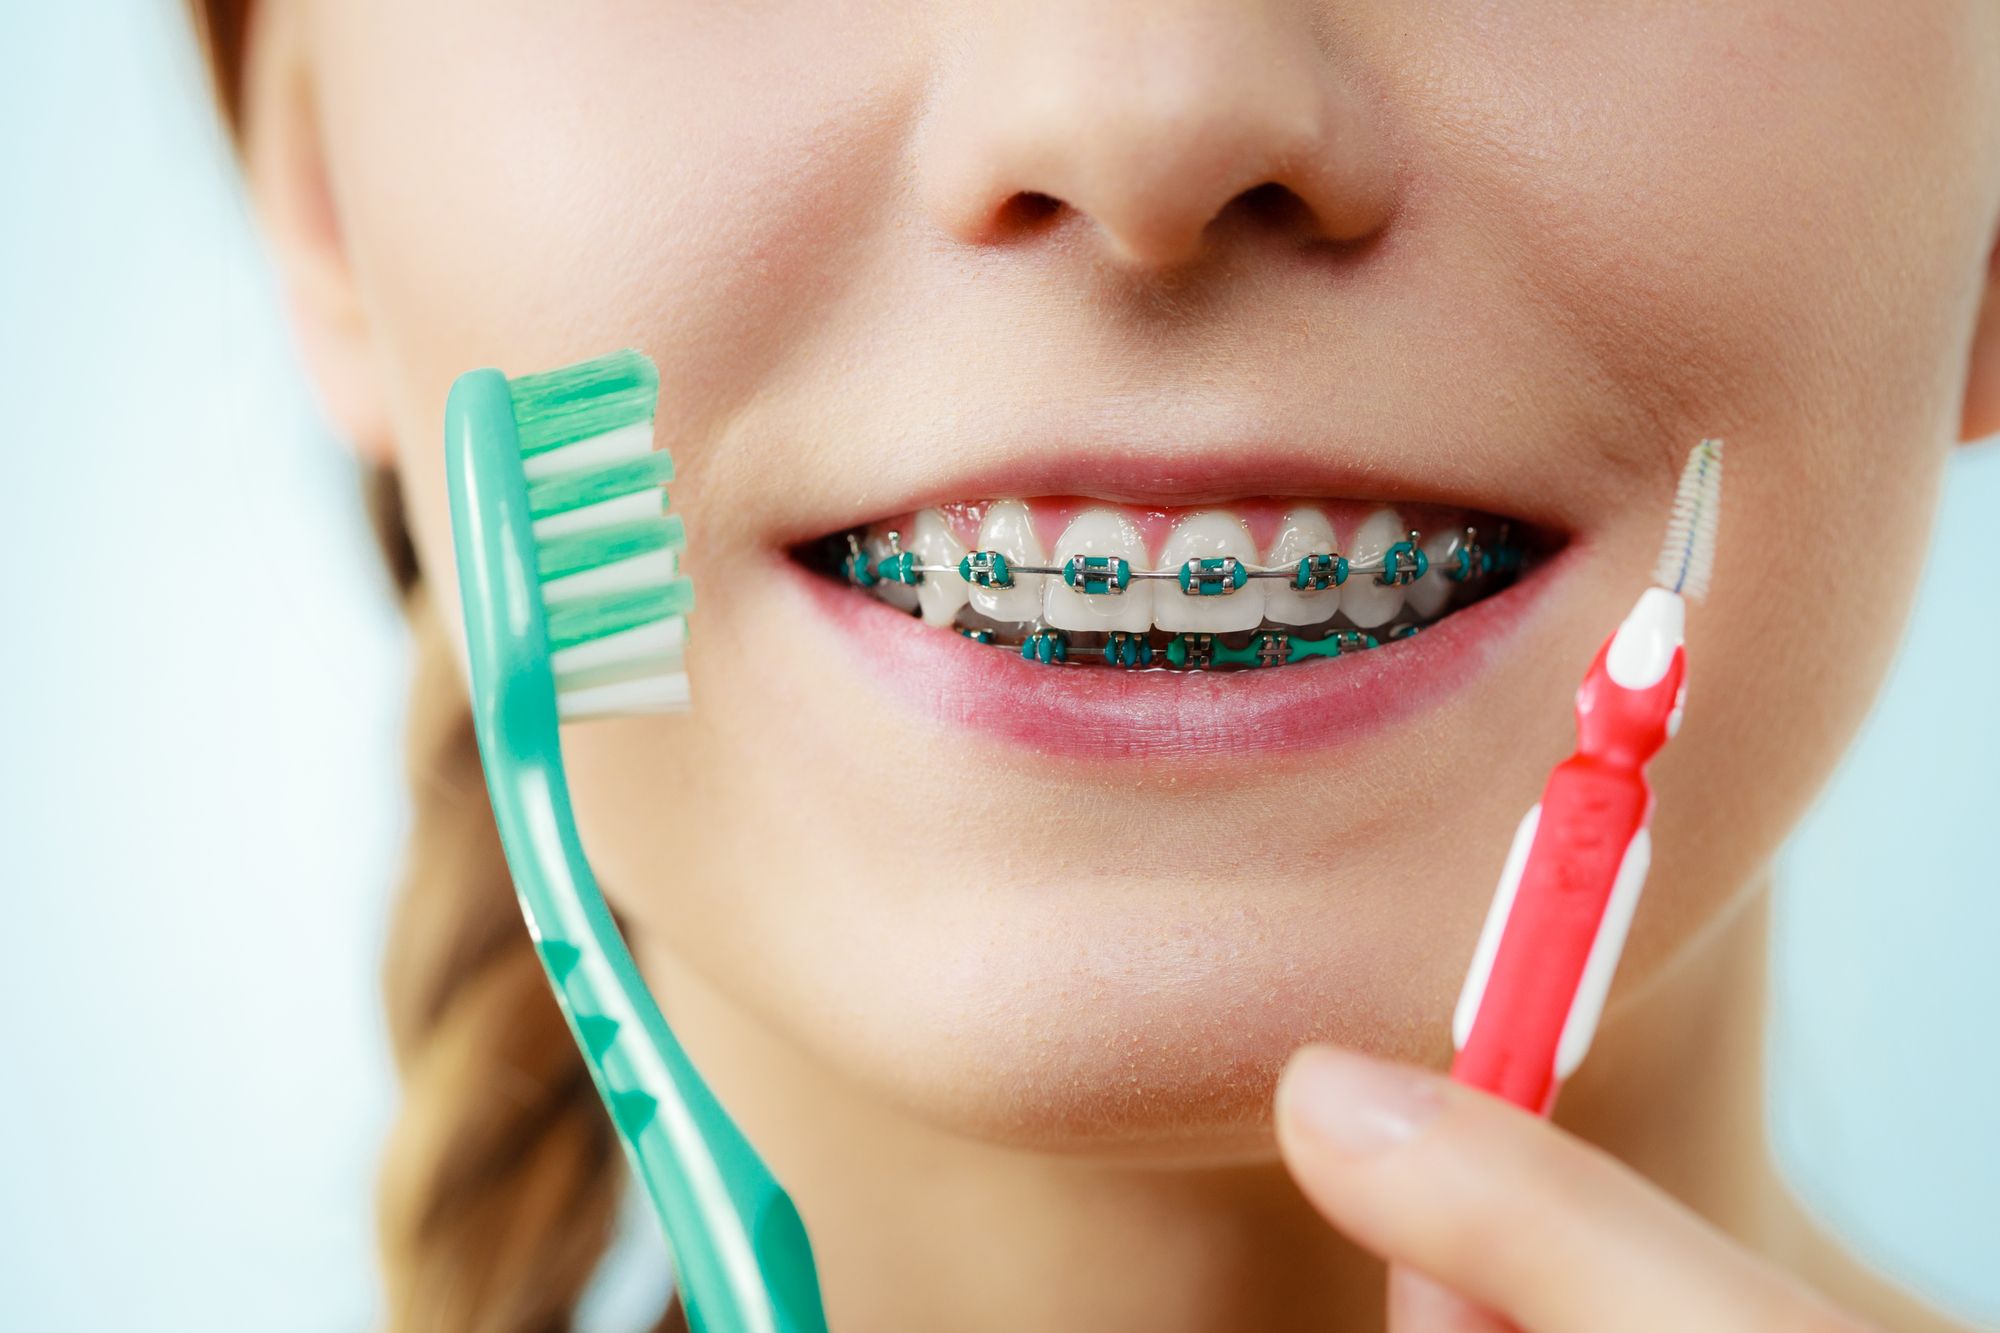 girl with traditional braces holding toothbrush and flosser